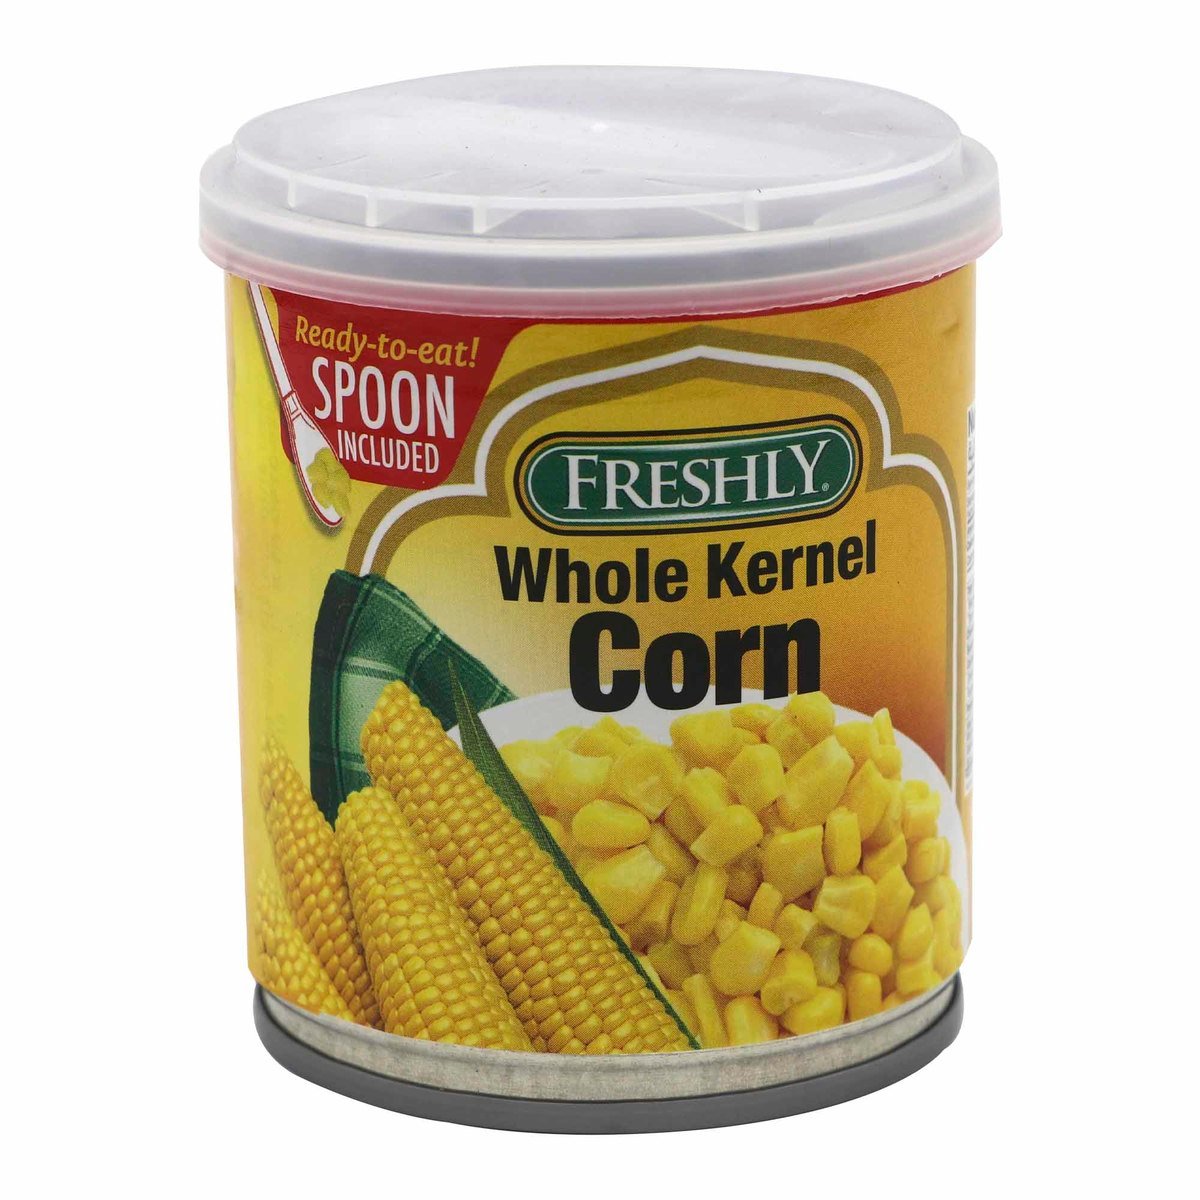 Freshly Whole Kernel Corn with Spoon 185g